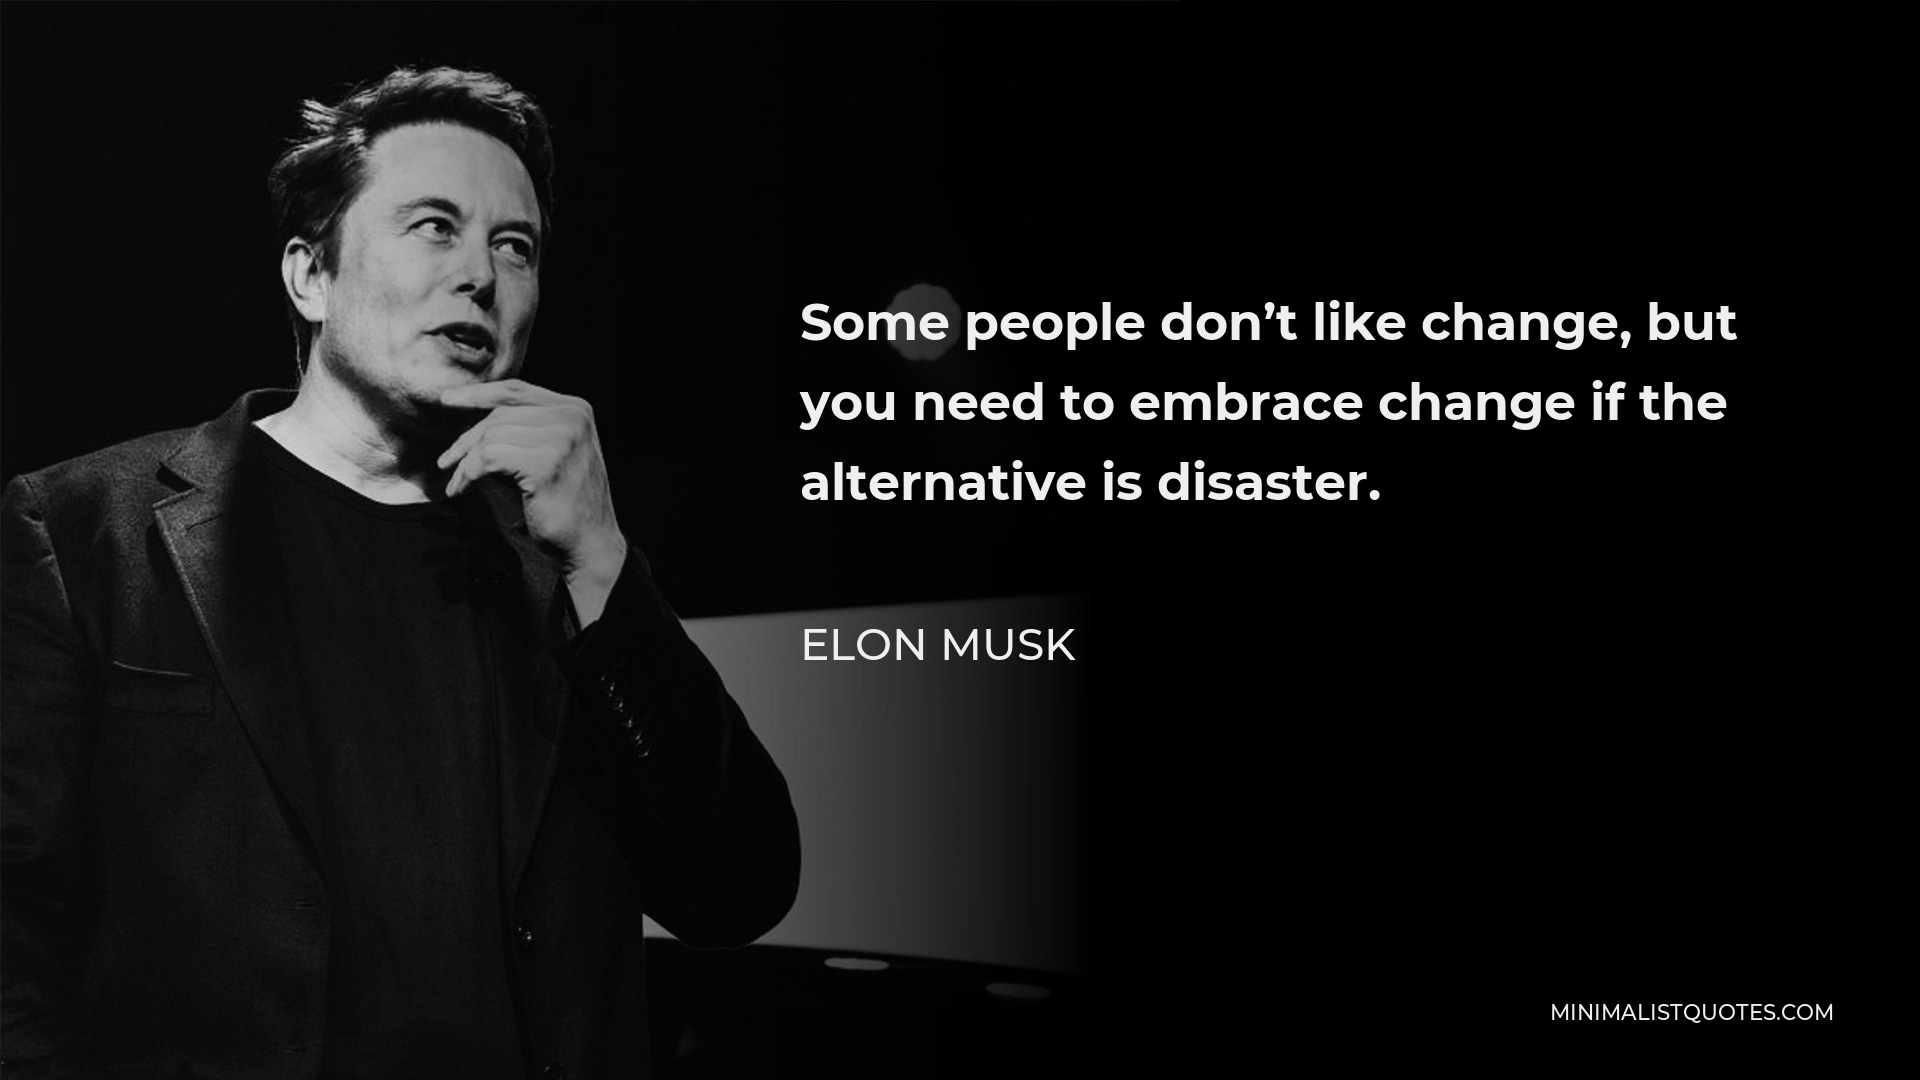 Elon Musk Quote - Some people don’t like change, but you need to embrace change if the alternative is disaster.